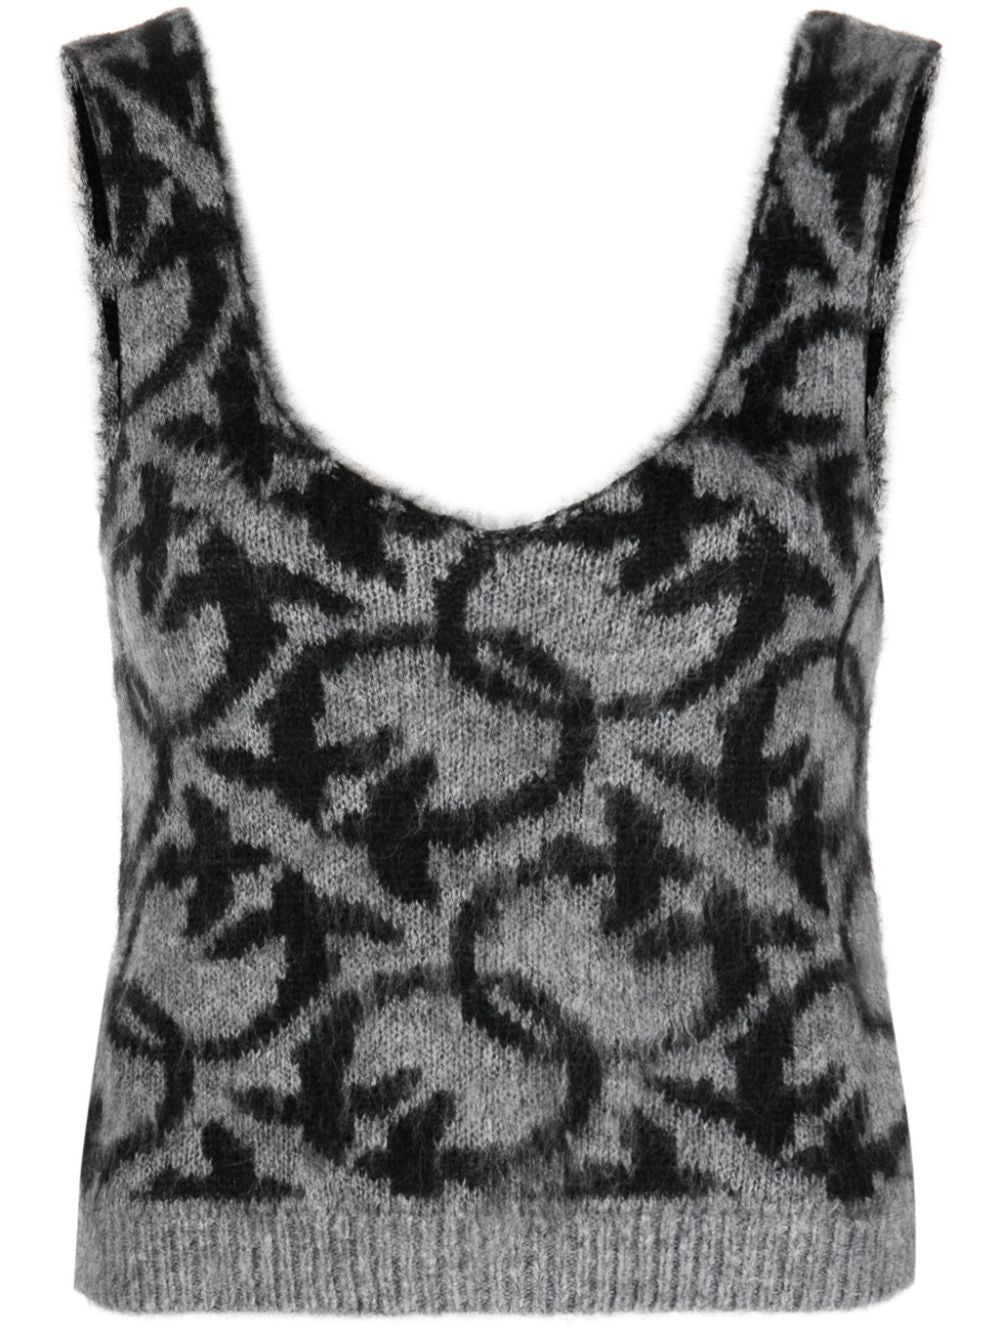 Lover Birds knitted top